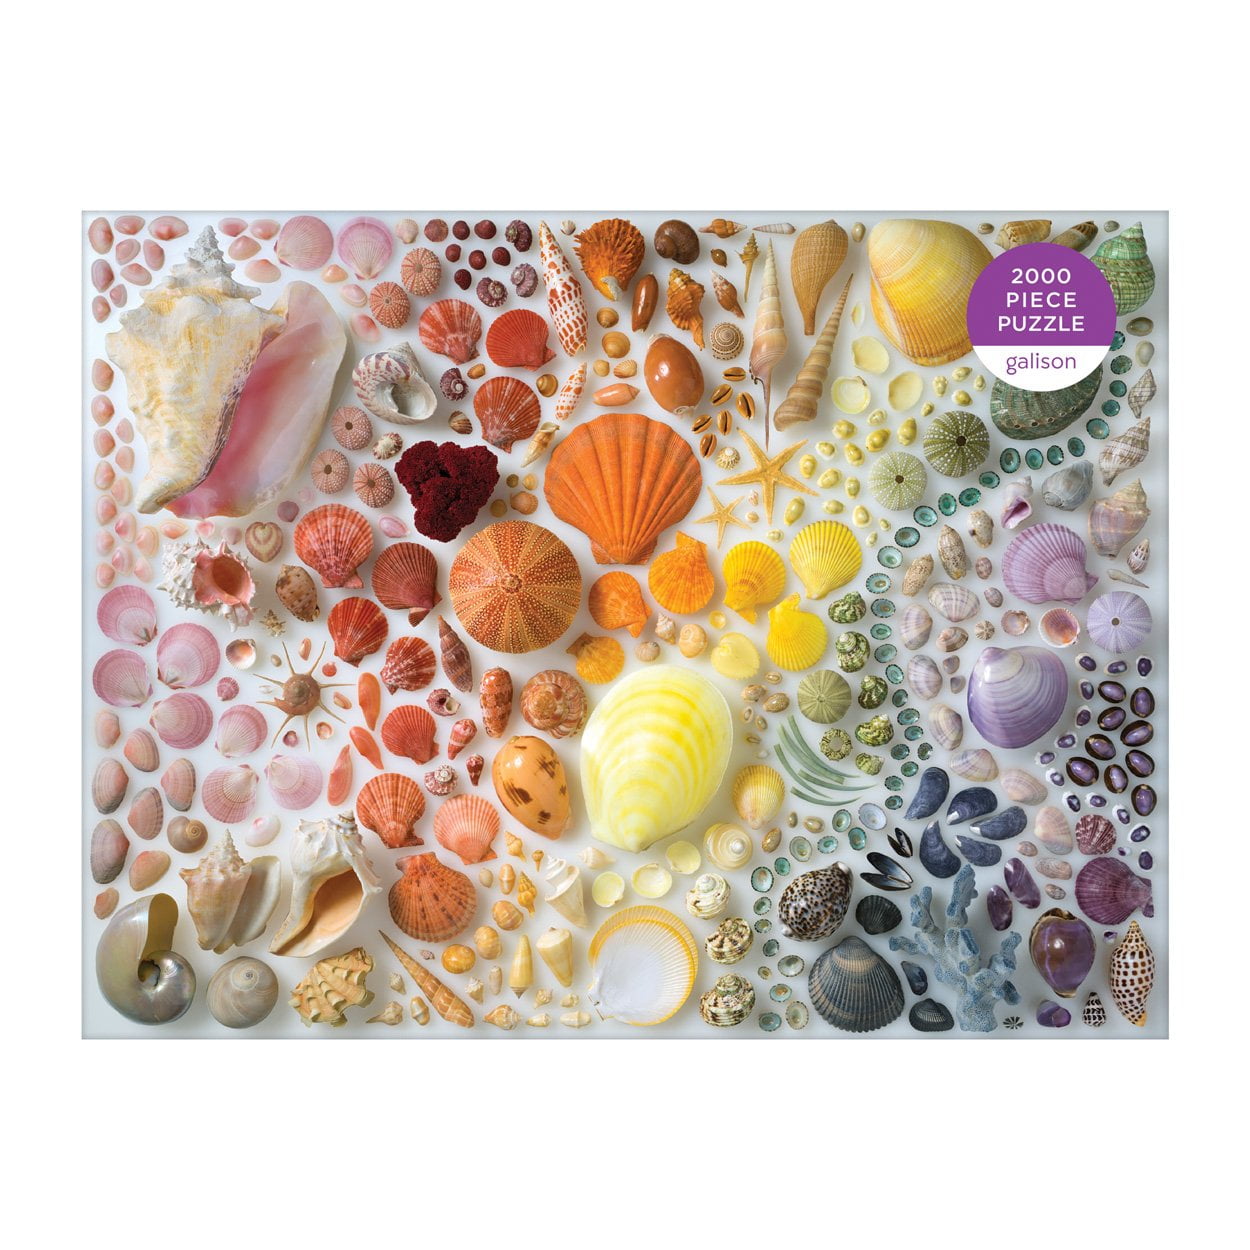 for sale online Rainbow Ornaments 500-Pc Puzzle by Galison 2017, Game 